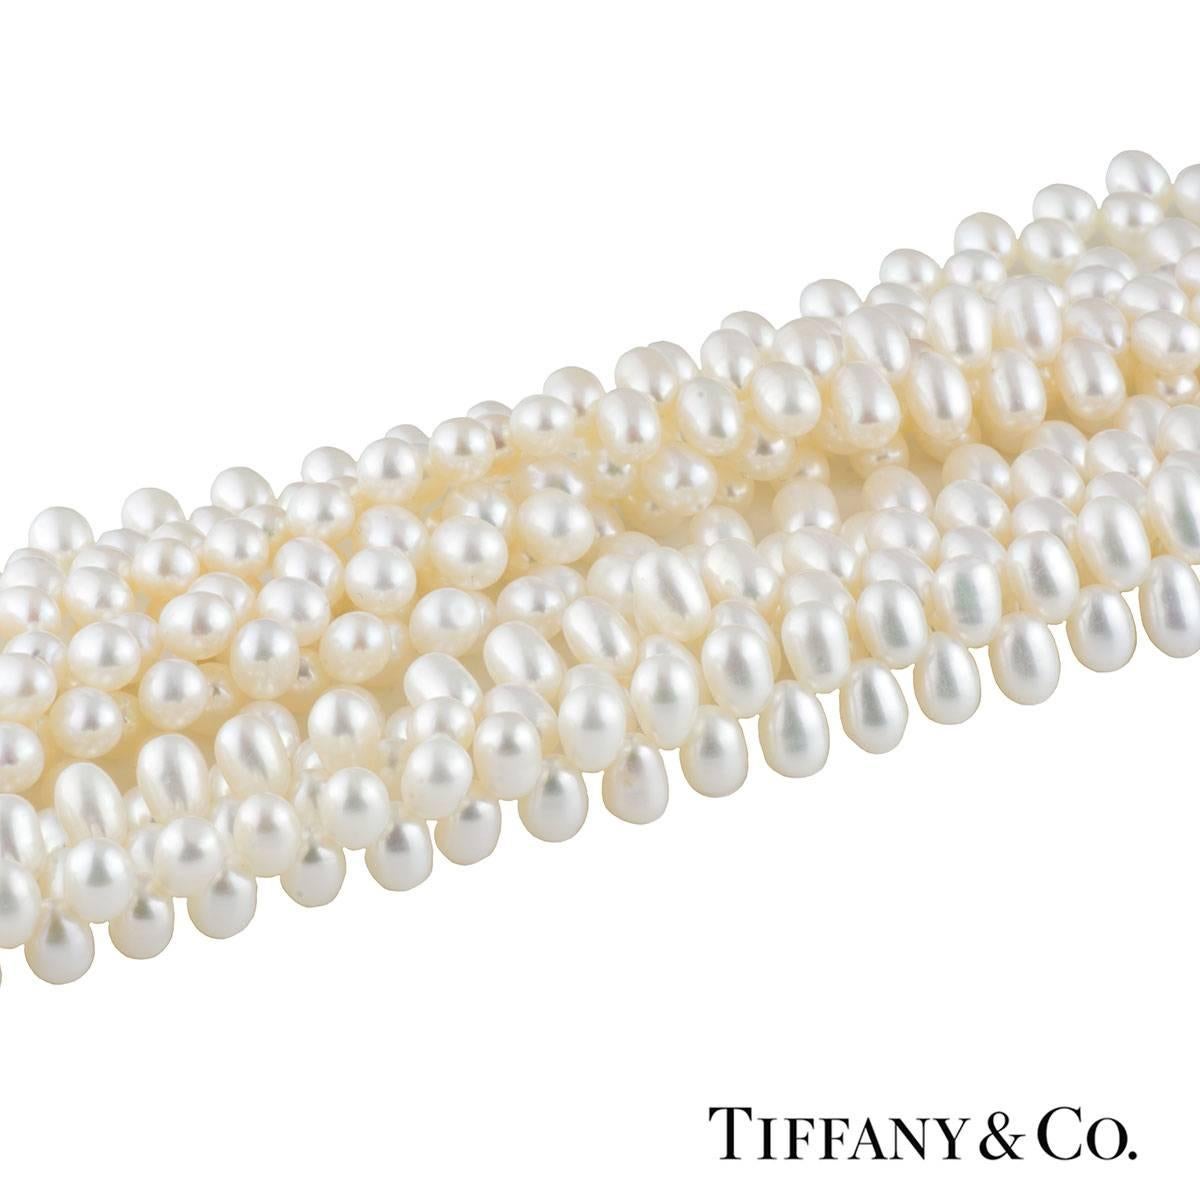 A unique silver Tiffany & Co. pearl torsade necklace from the Paloma Picasso collection. The necklace comprises of 8 rows of cultured pearls, oval shaped approximately 7mm. The necklace features a double toggle clasp which insert in each other